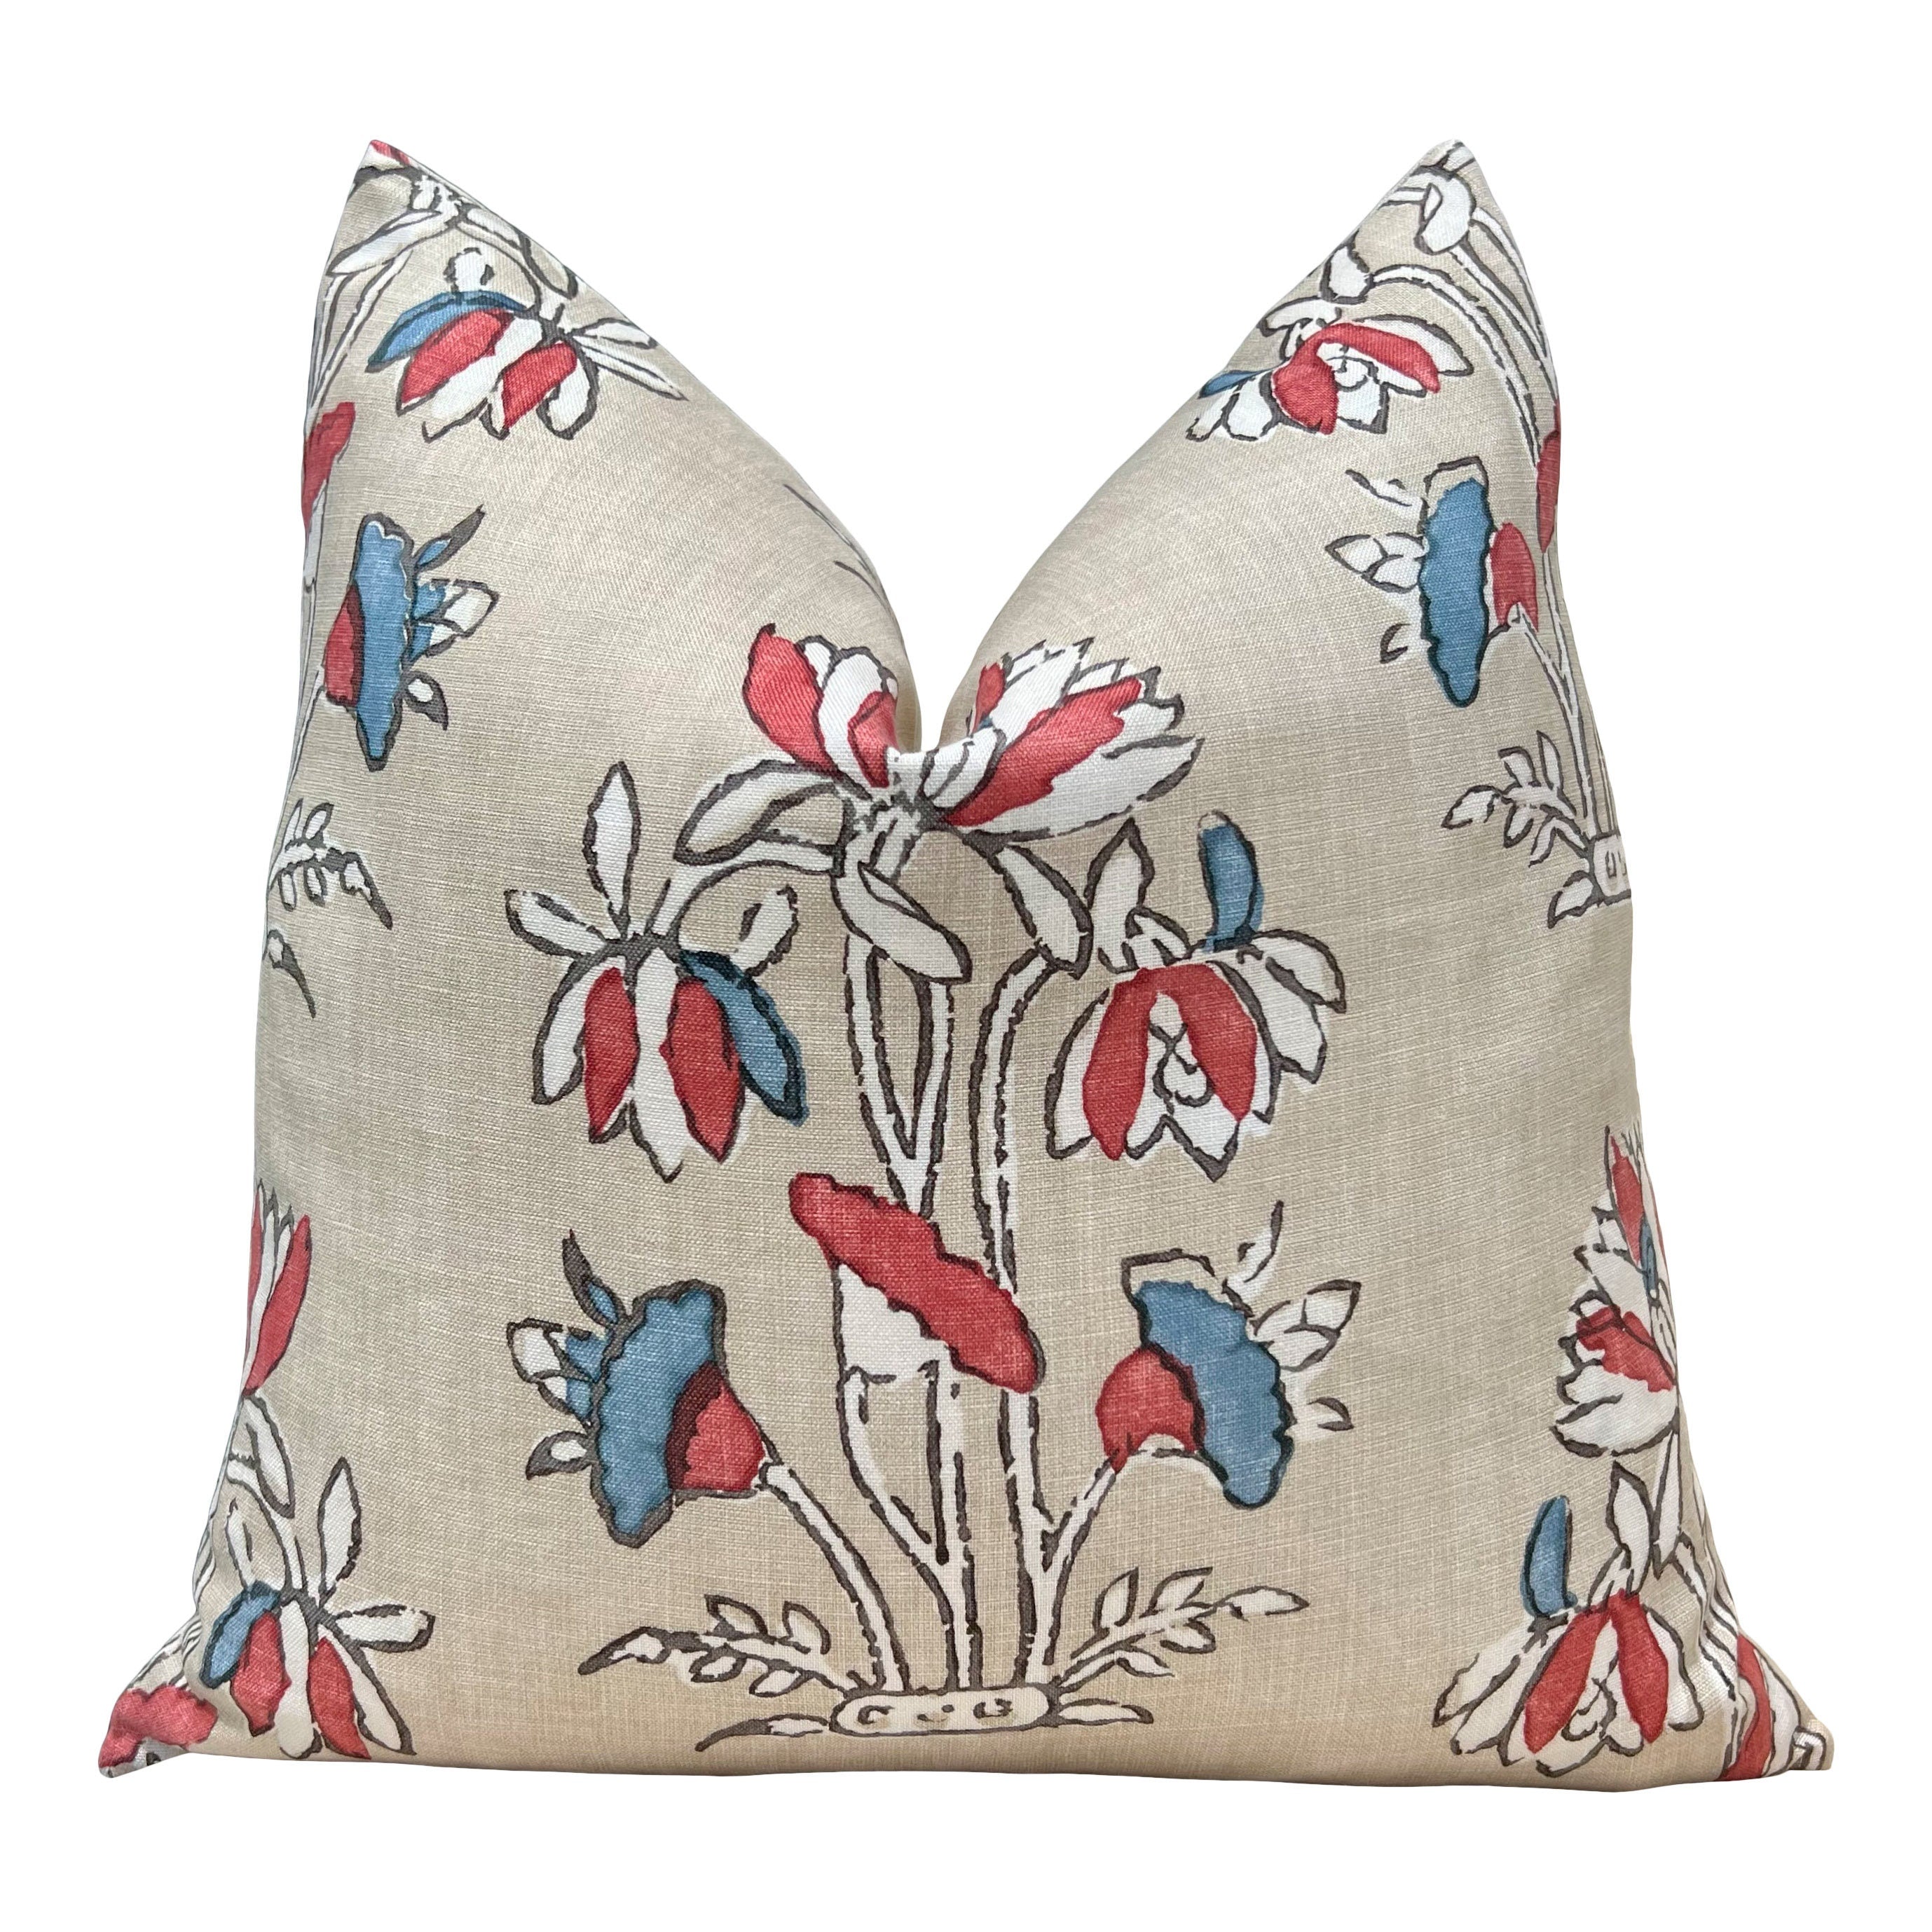 Designer Floral Pillow in Blue Red and Tan. Thibaut Classic Floral Decorative Cushion Cover in Beige, Euro Sham Pillow Case Bedroom Decor